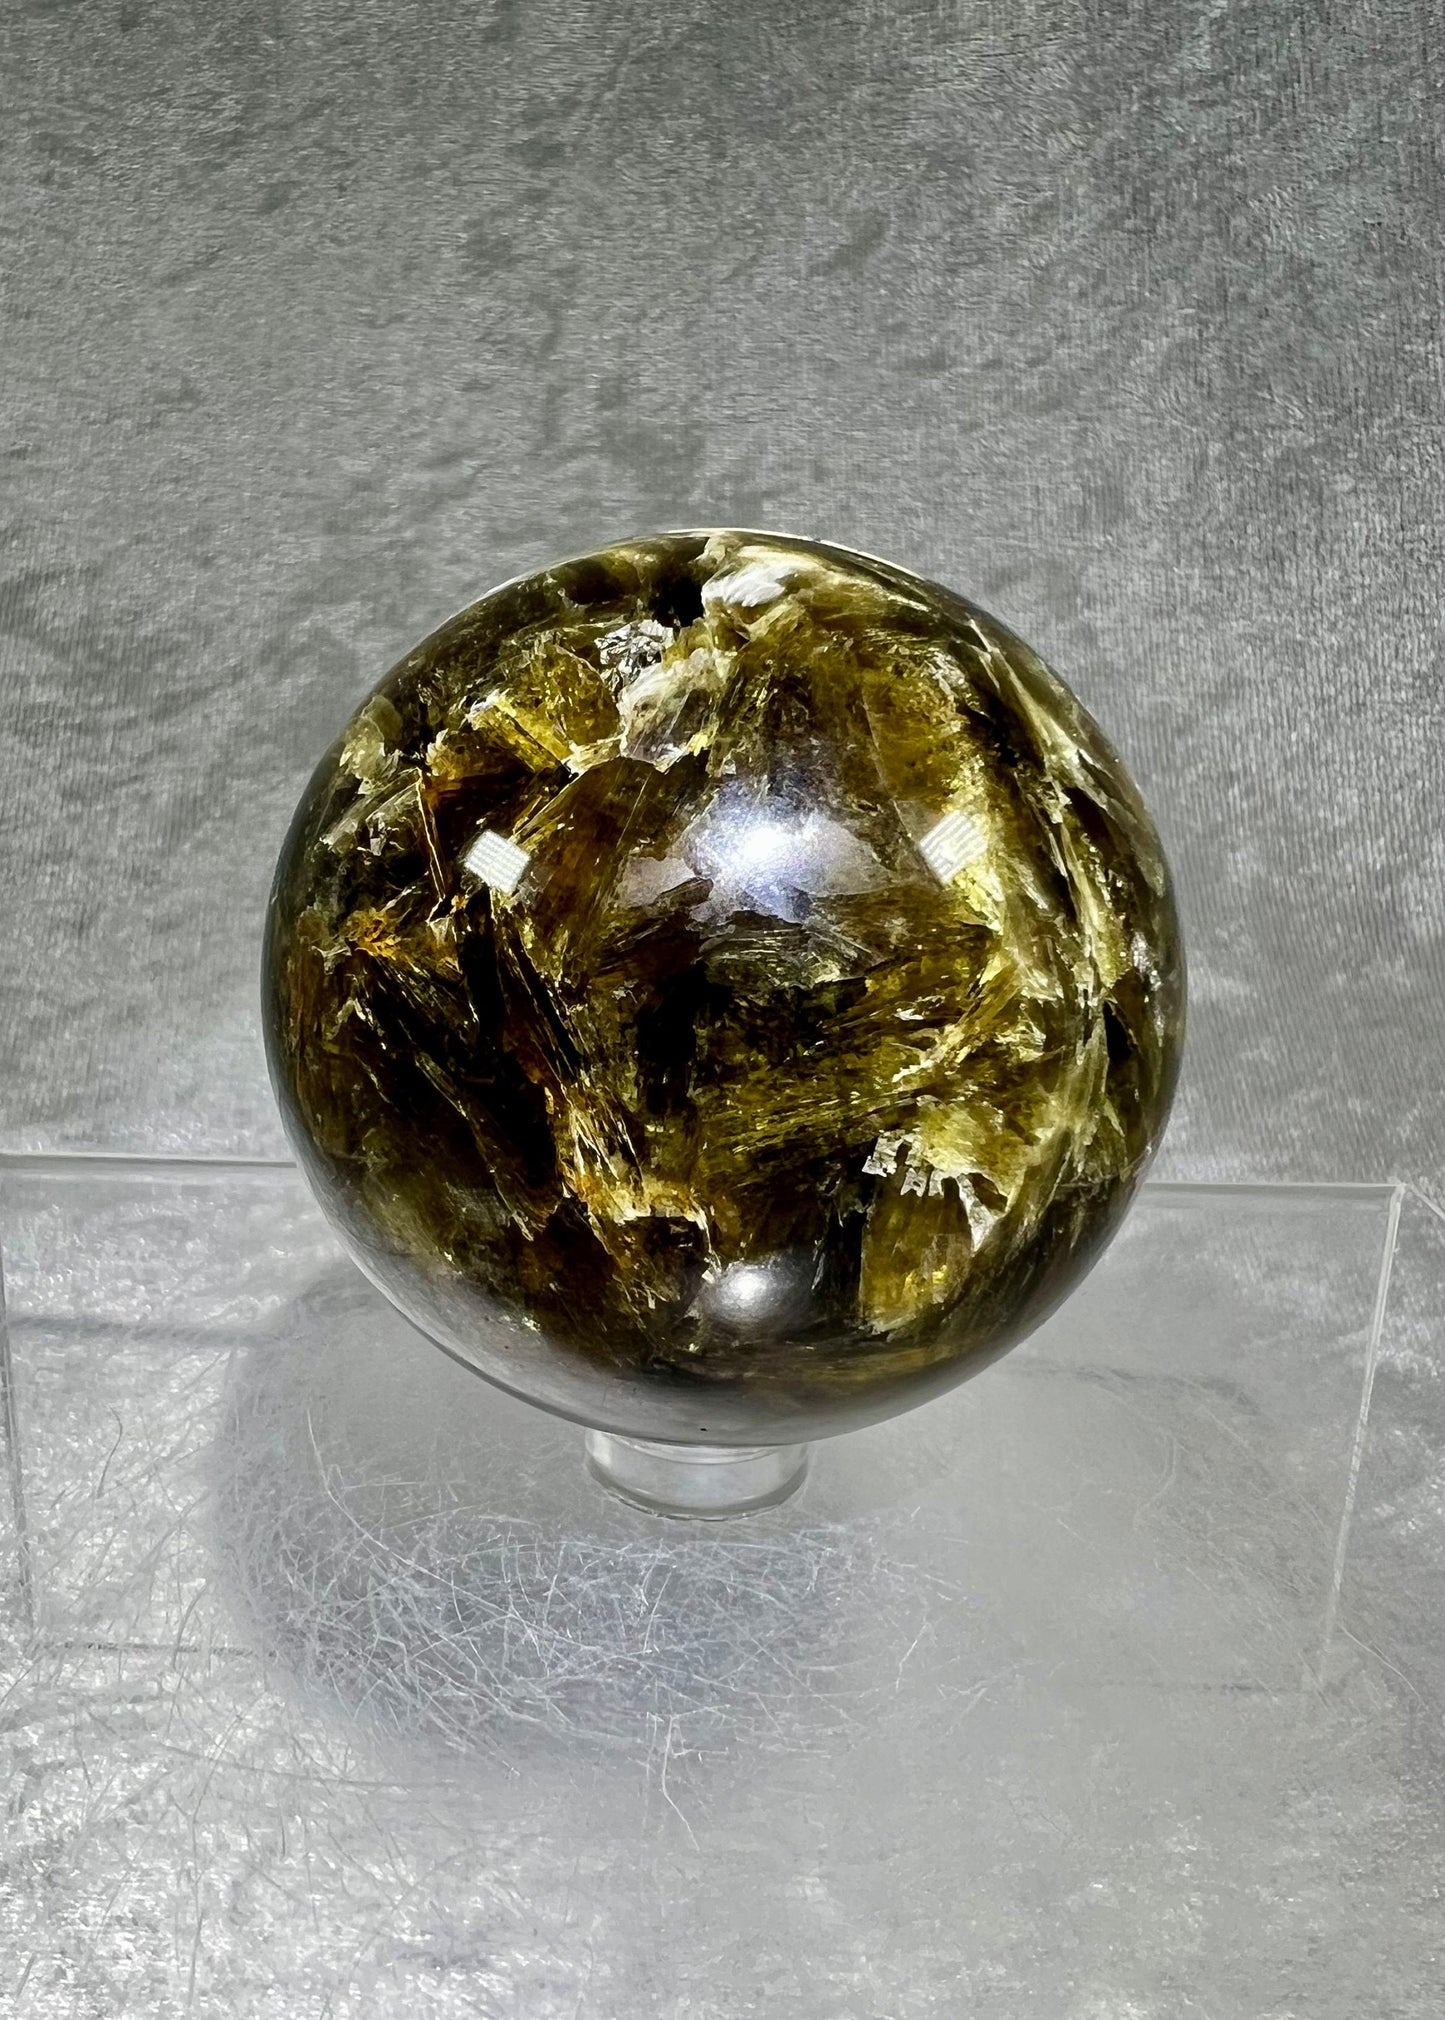 Amazing Gold Mica Sphere. 60mm. Gorgeous High Quality With Tons Of Flash. Beautiful Display Crystal.